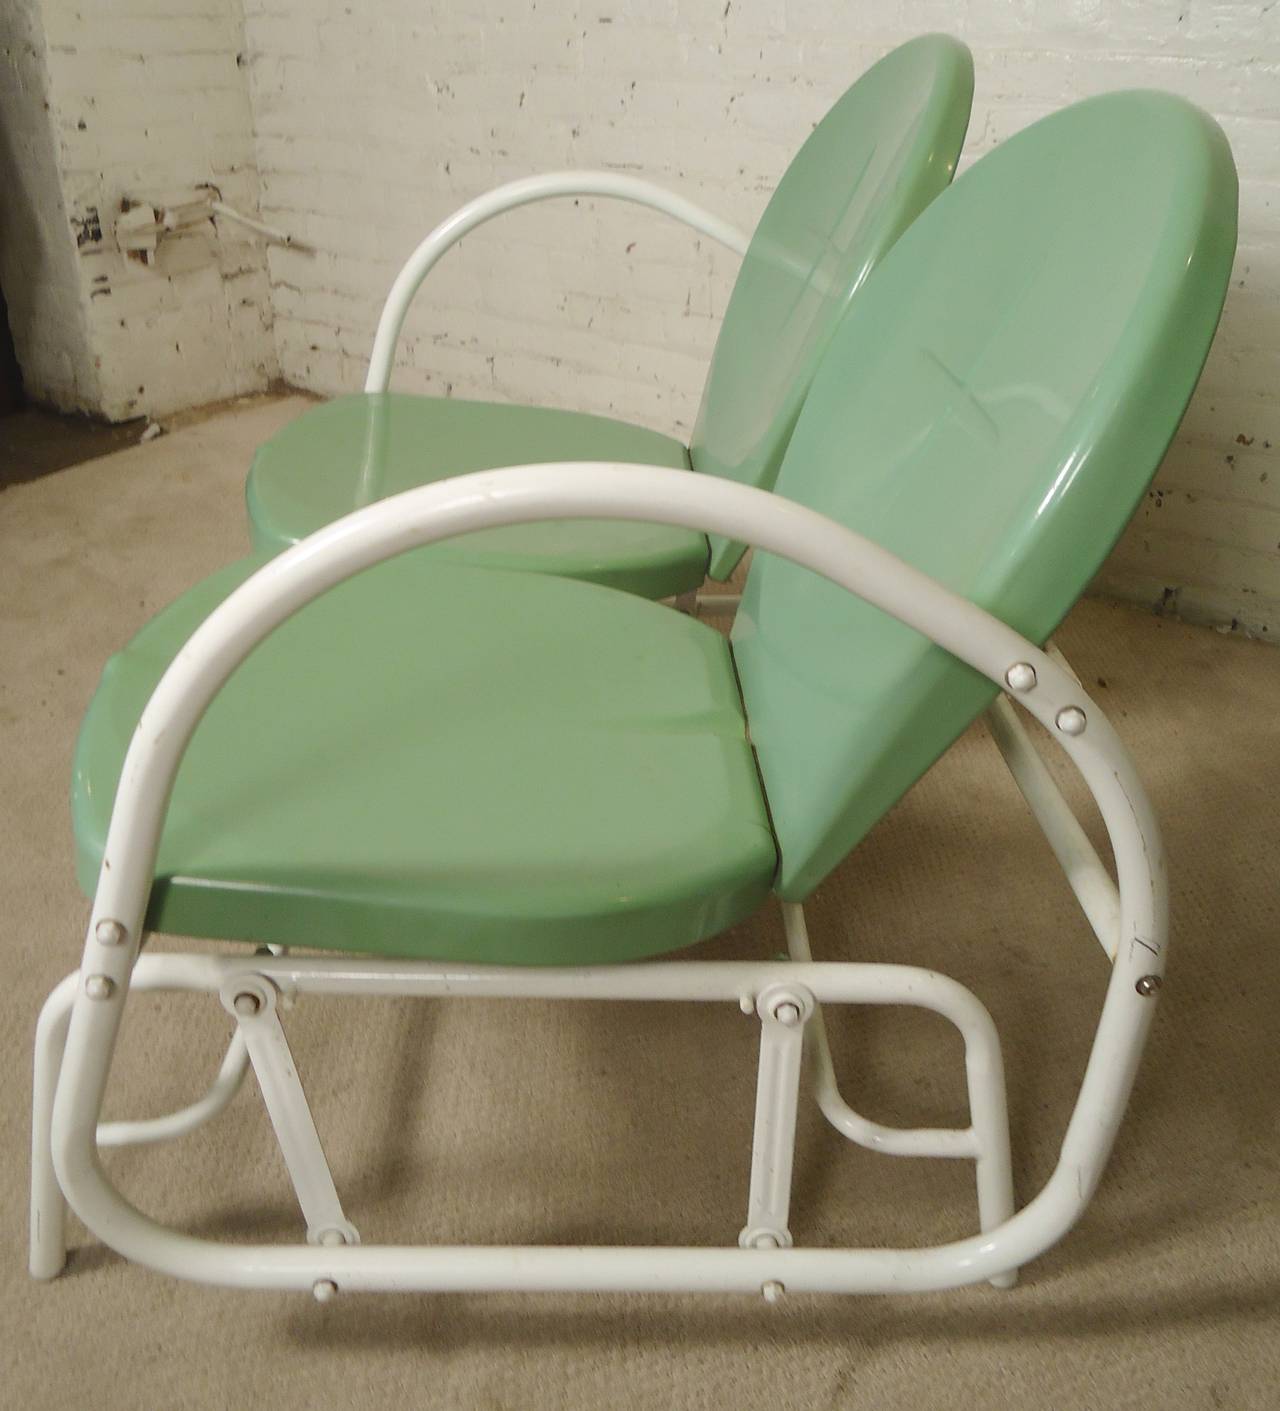 Metal gliding bench with vintage modern flair. Dramatic tubular arms, dual shell seats. Sturdy frame with relaxing gliding feature.

(Please confirm item location - NY or NJ - with dealer)